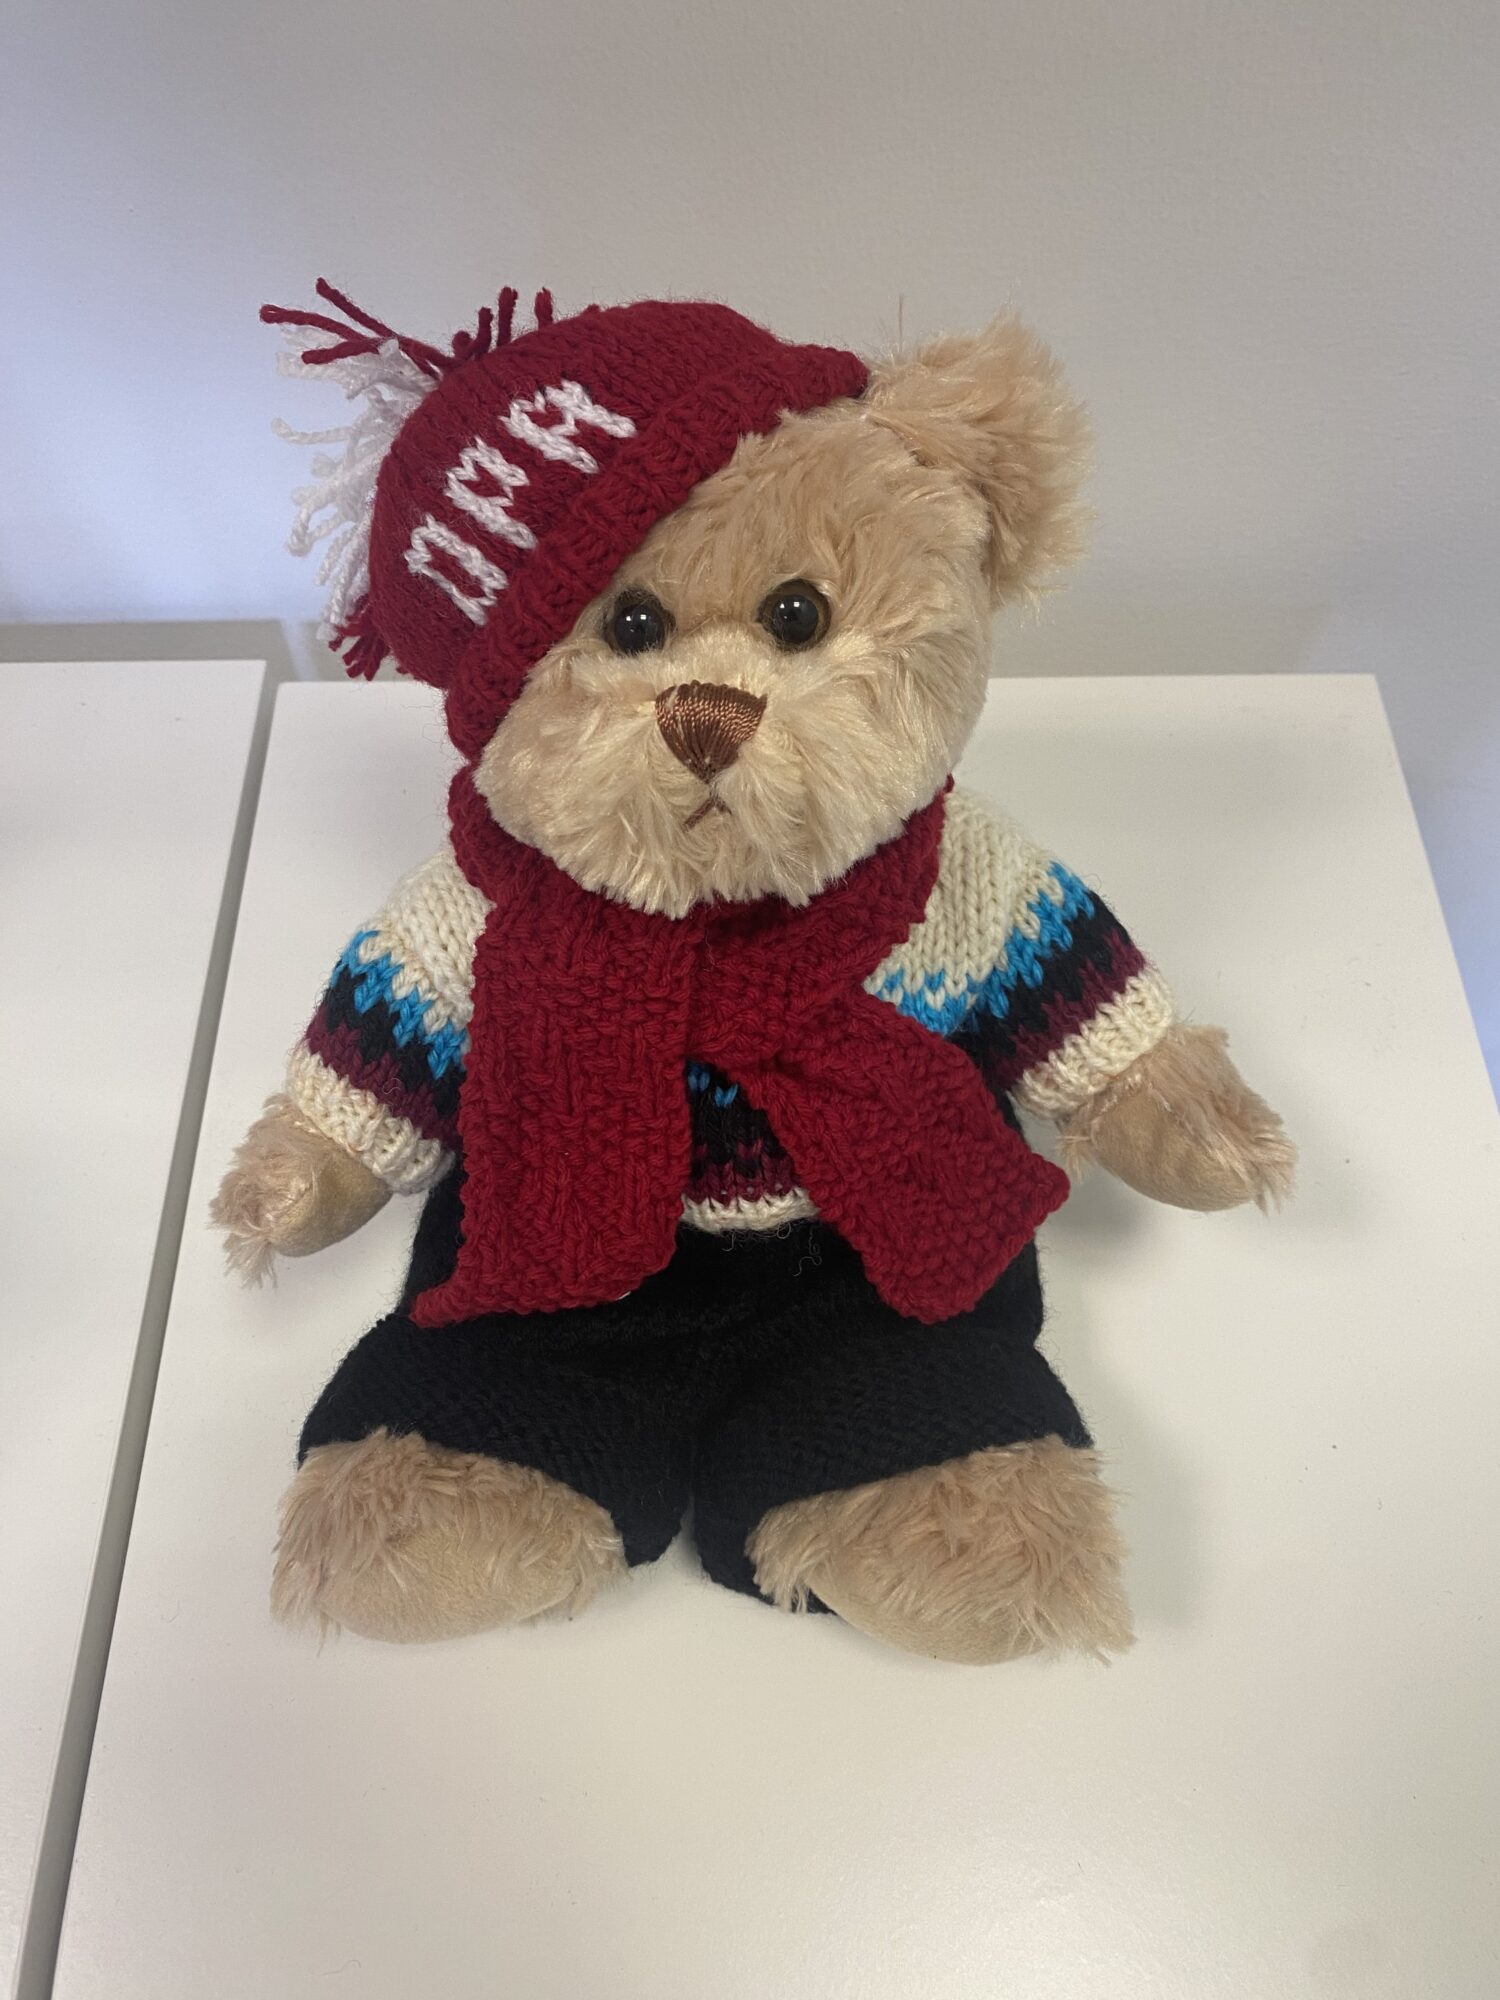 Small Teddy - Full outfit with red OPA hat & scarf - The OPA